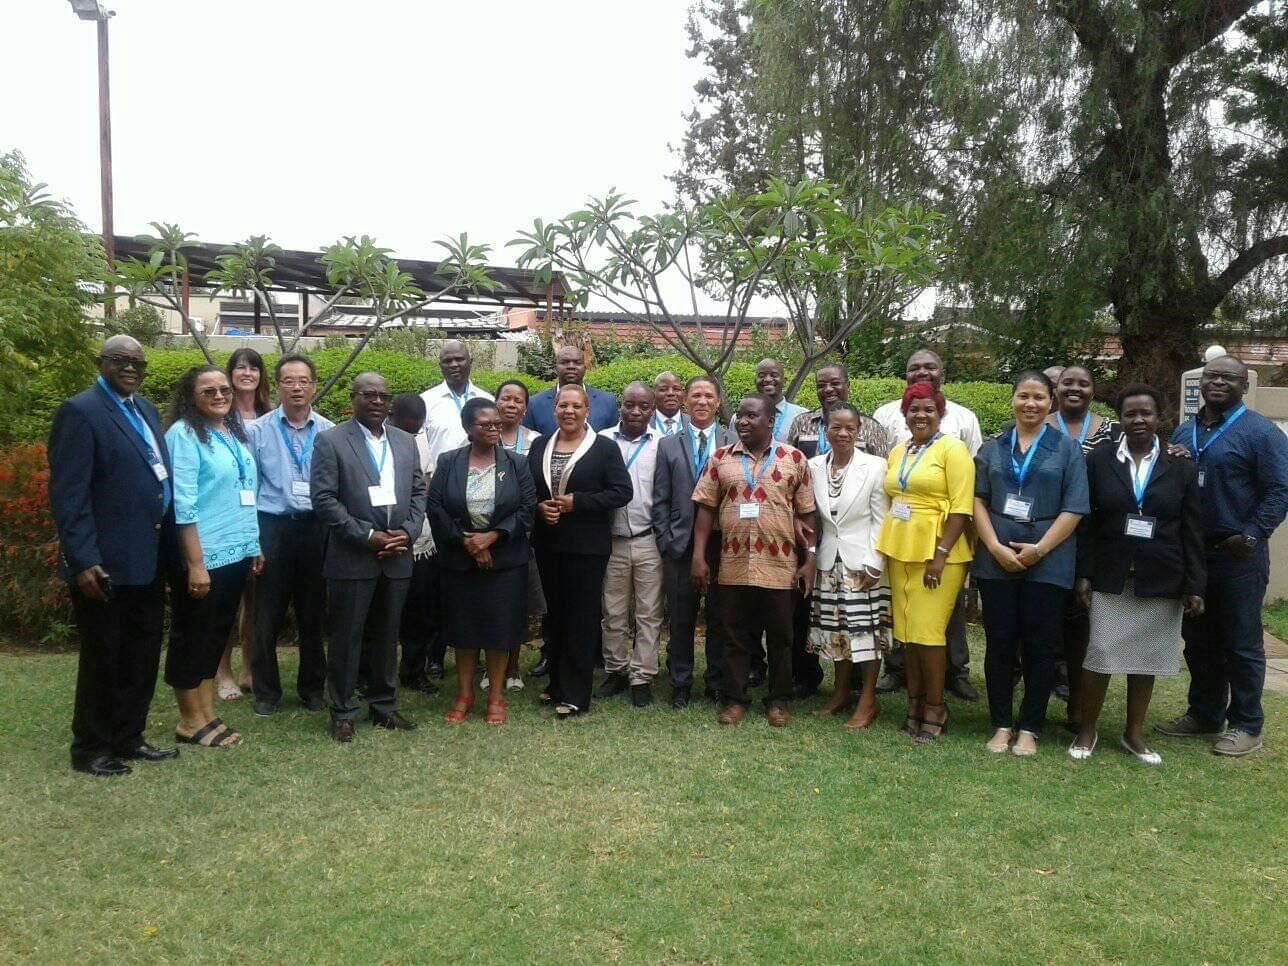 © 2019 AU-IBAR. Participants at the 5th General Assembly of the Sub-Regional Focal Point (S-RFP) for the management of AnGR in Southern Africa at Oasis Motel, Gaborone, Botswana (26-29 November 2018).